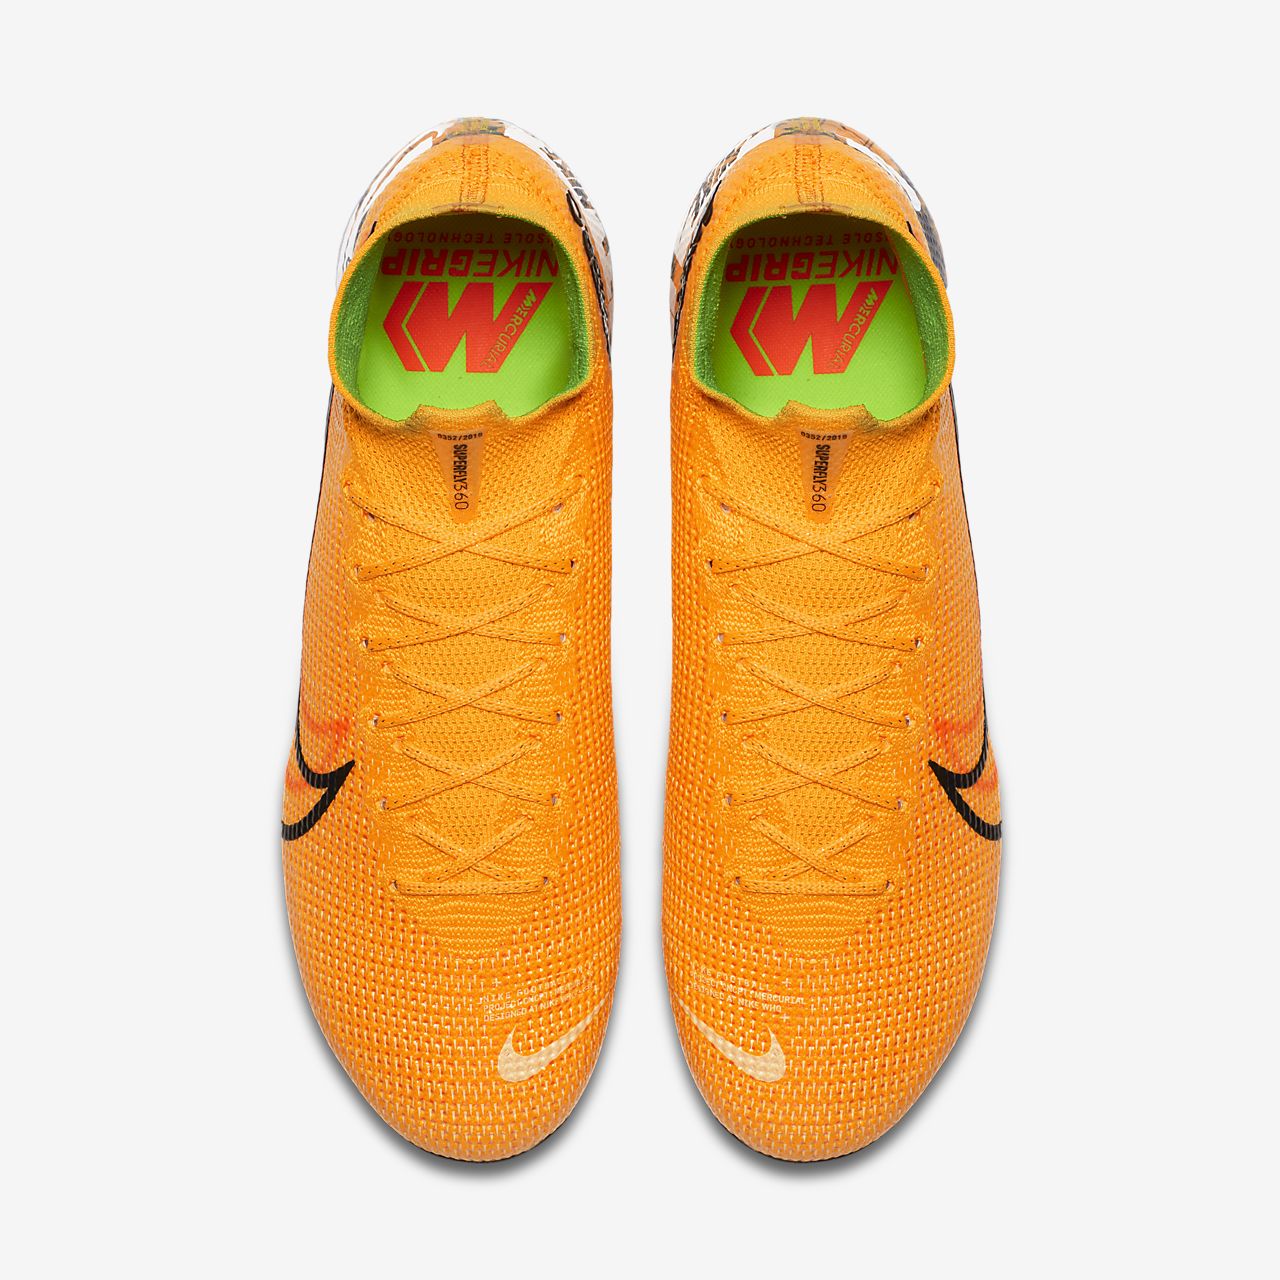 Nike Mercurial Dream Speed ​​Superfly Elite Youth FG Cleats.